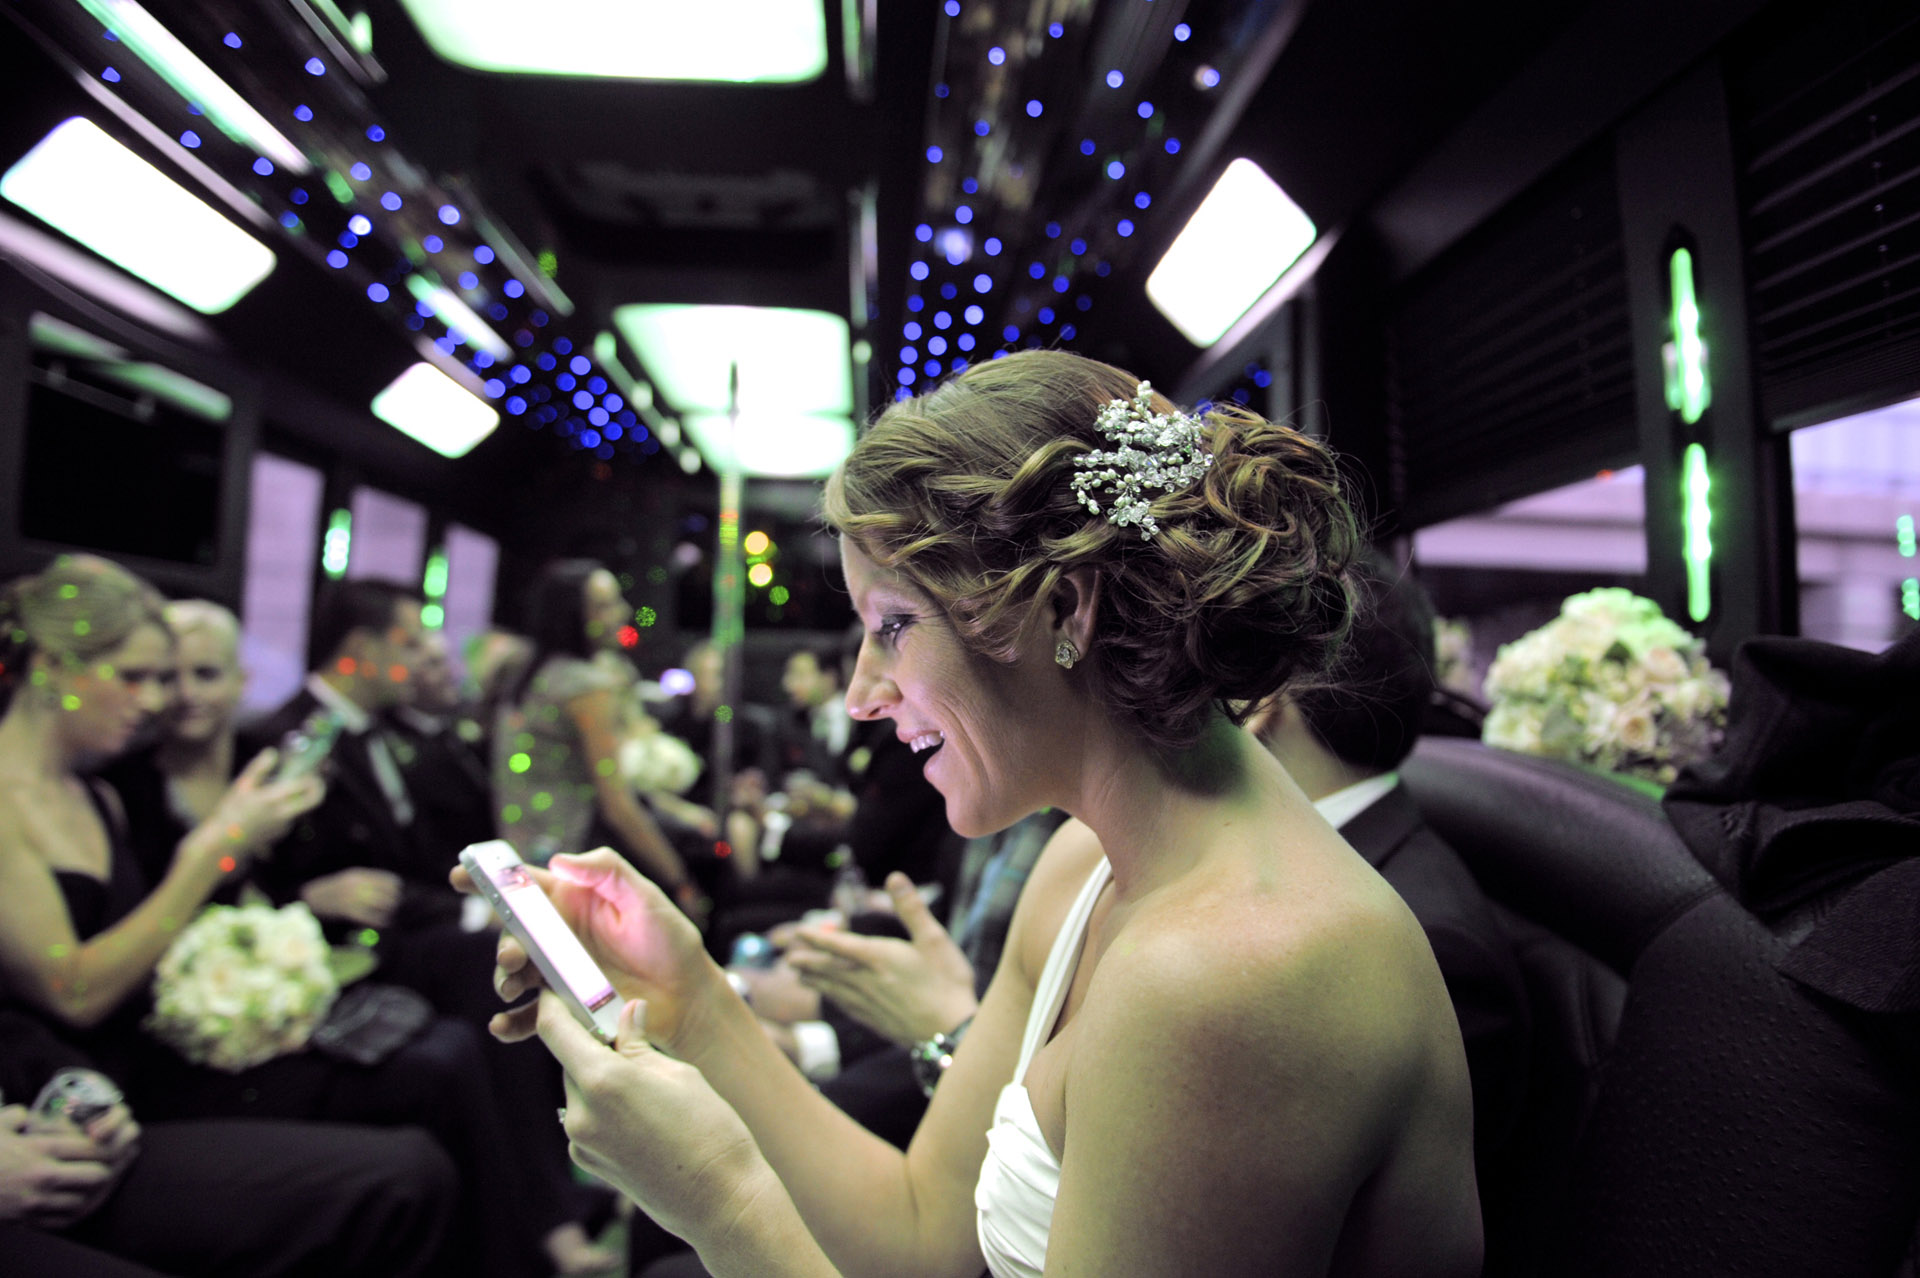 The Historic church Sweetest Heart of Mary and the Dearborn Inn of Detroit's historic church in Detroit and Dearborn, Michigan wedding photographer's of the bride changing her Facebook status in the limo bus on her way to her wedding reception at the Dearborn Inn in Dearborn, Michigan.